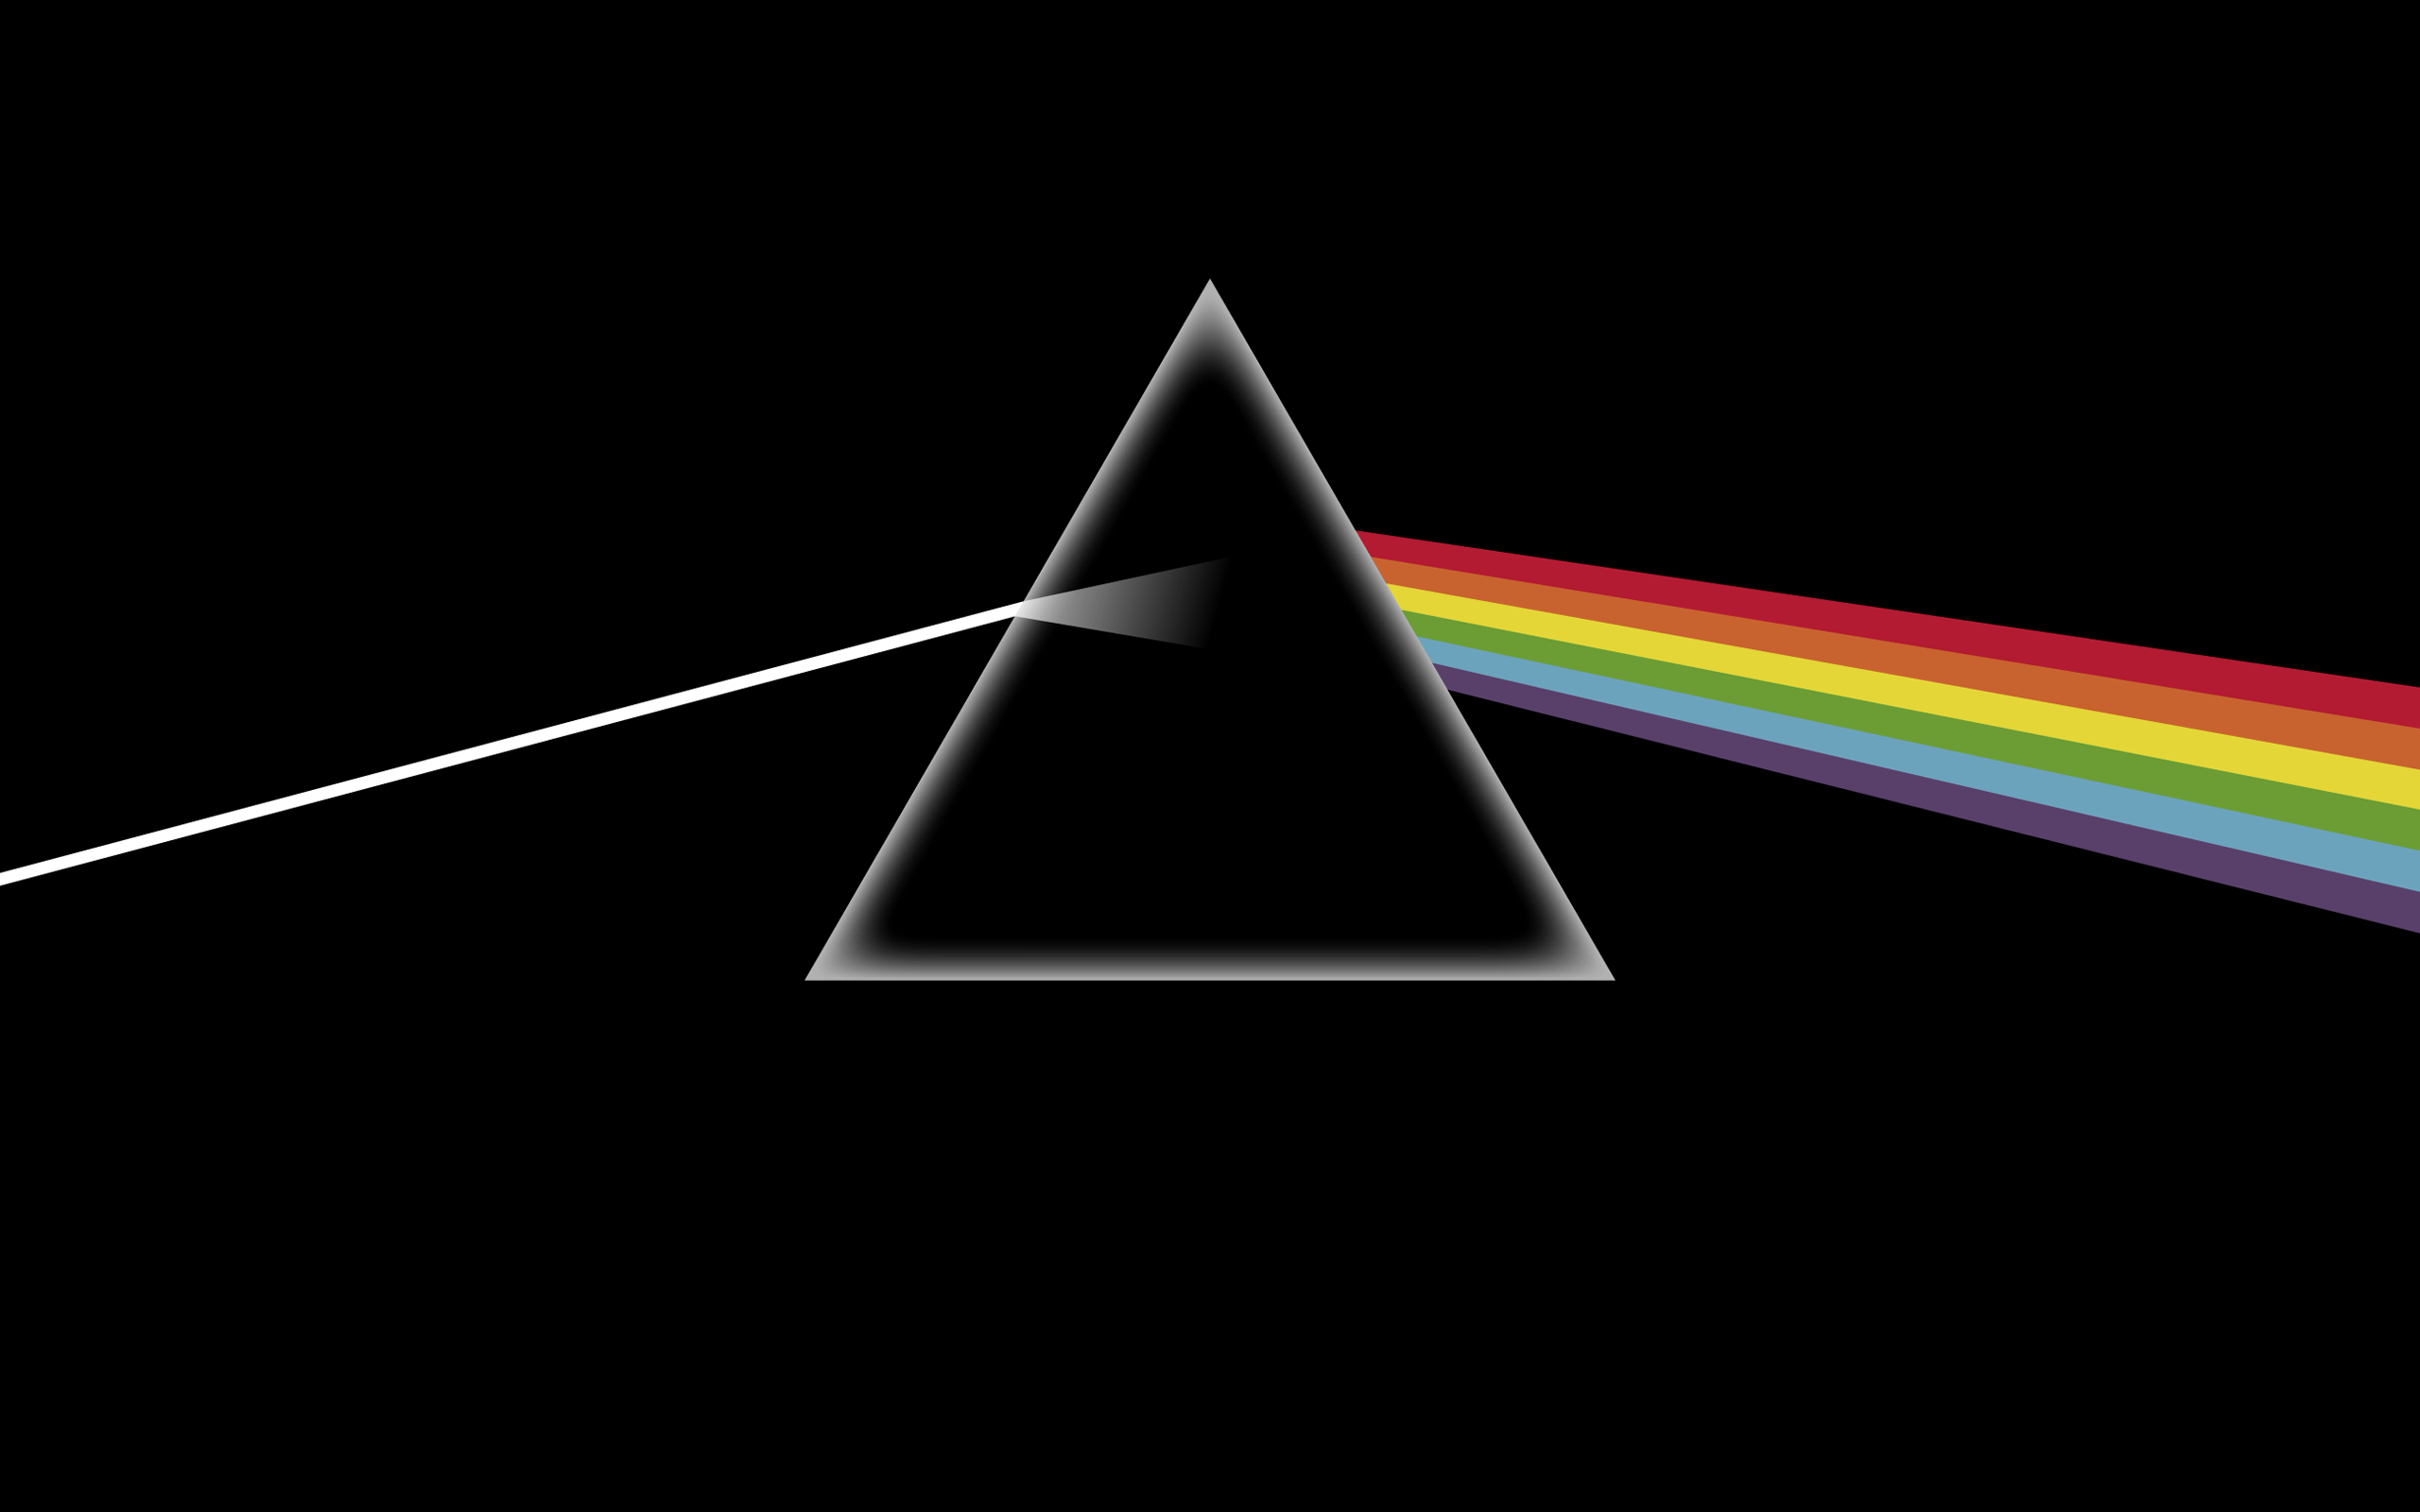 Dark Side of the Moon Wallpapers Pack by alphasnail